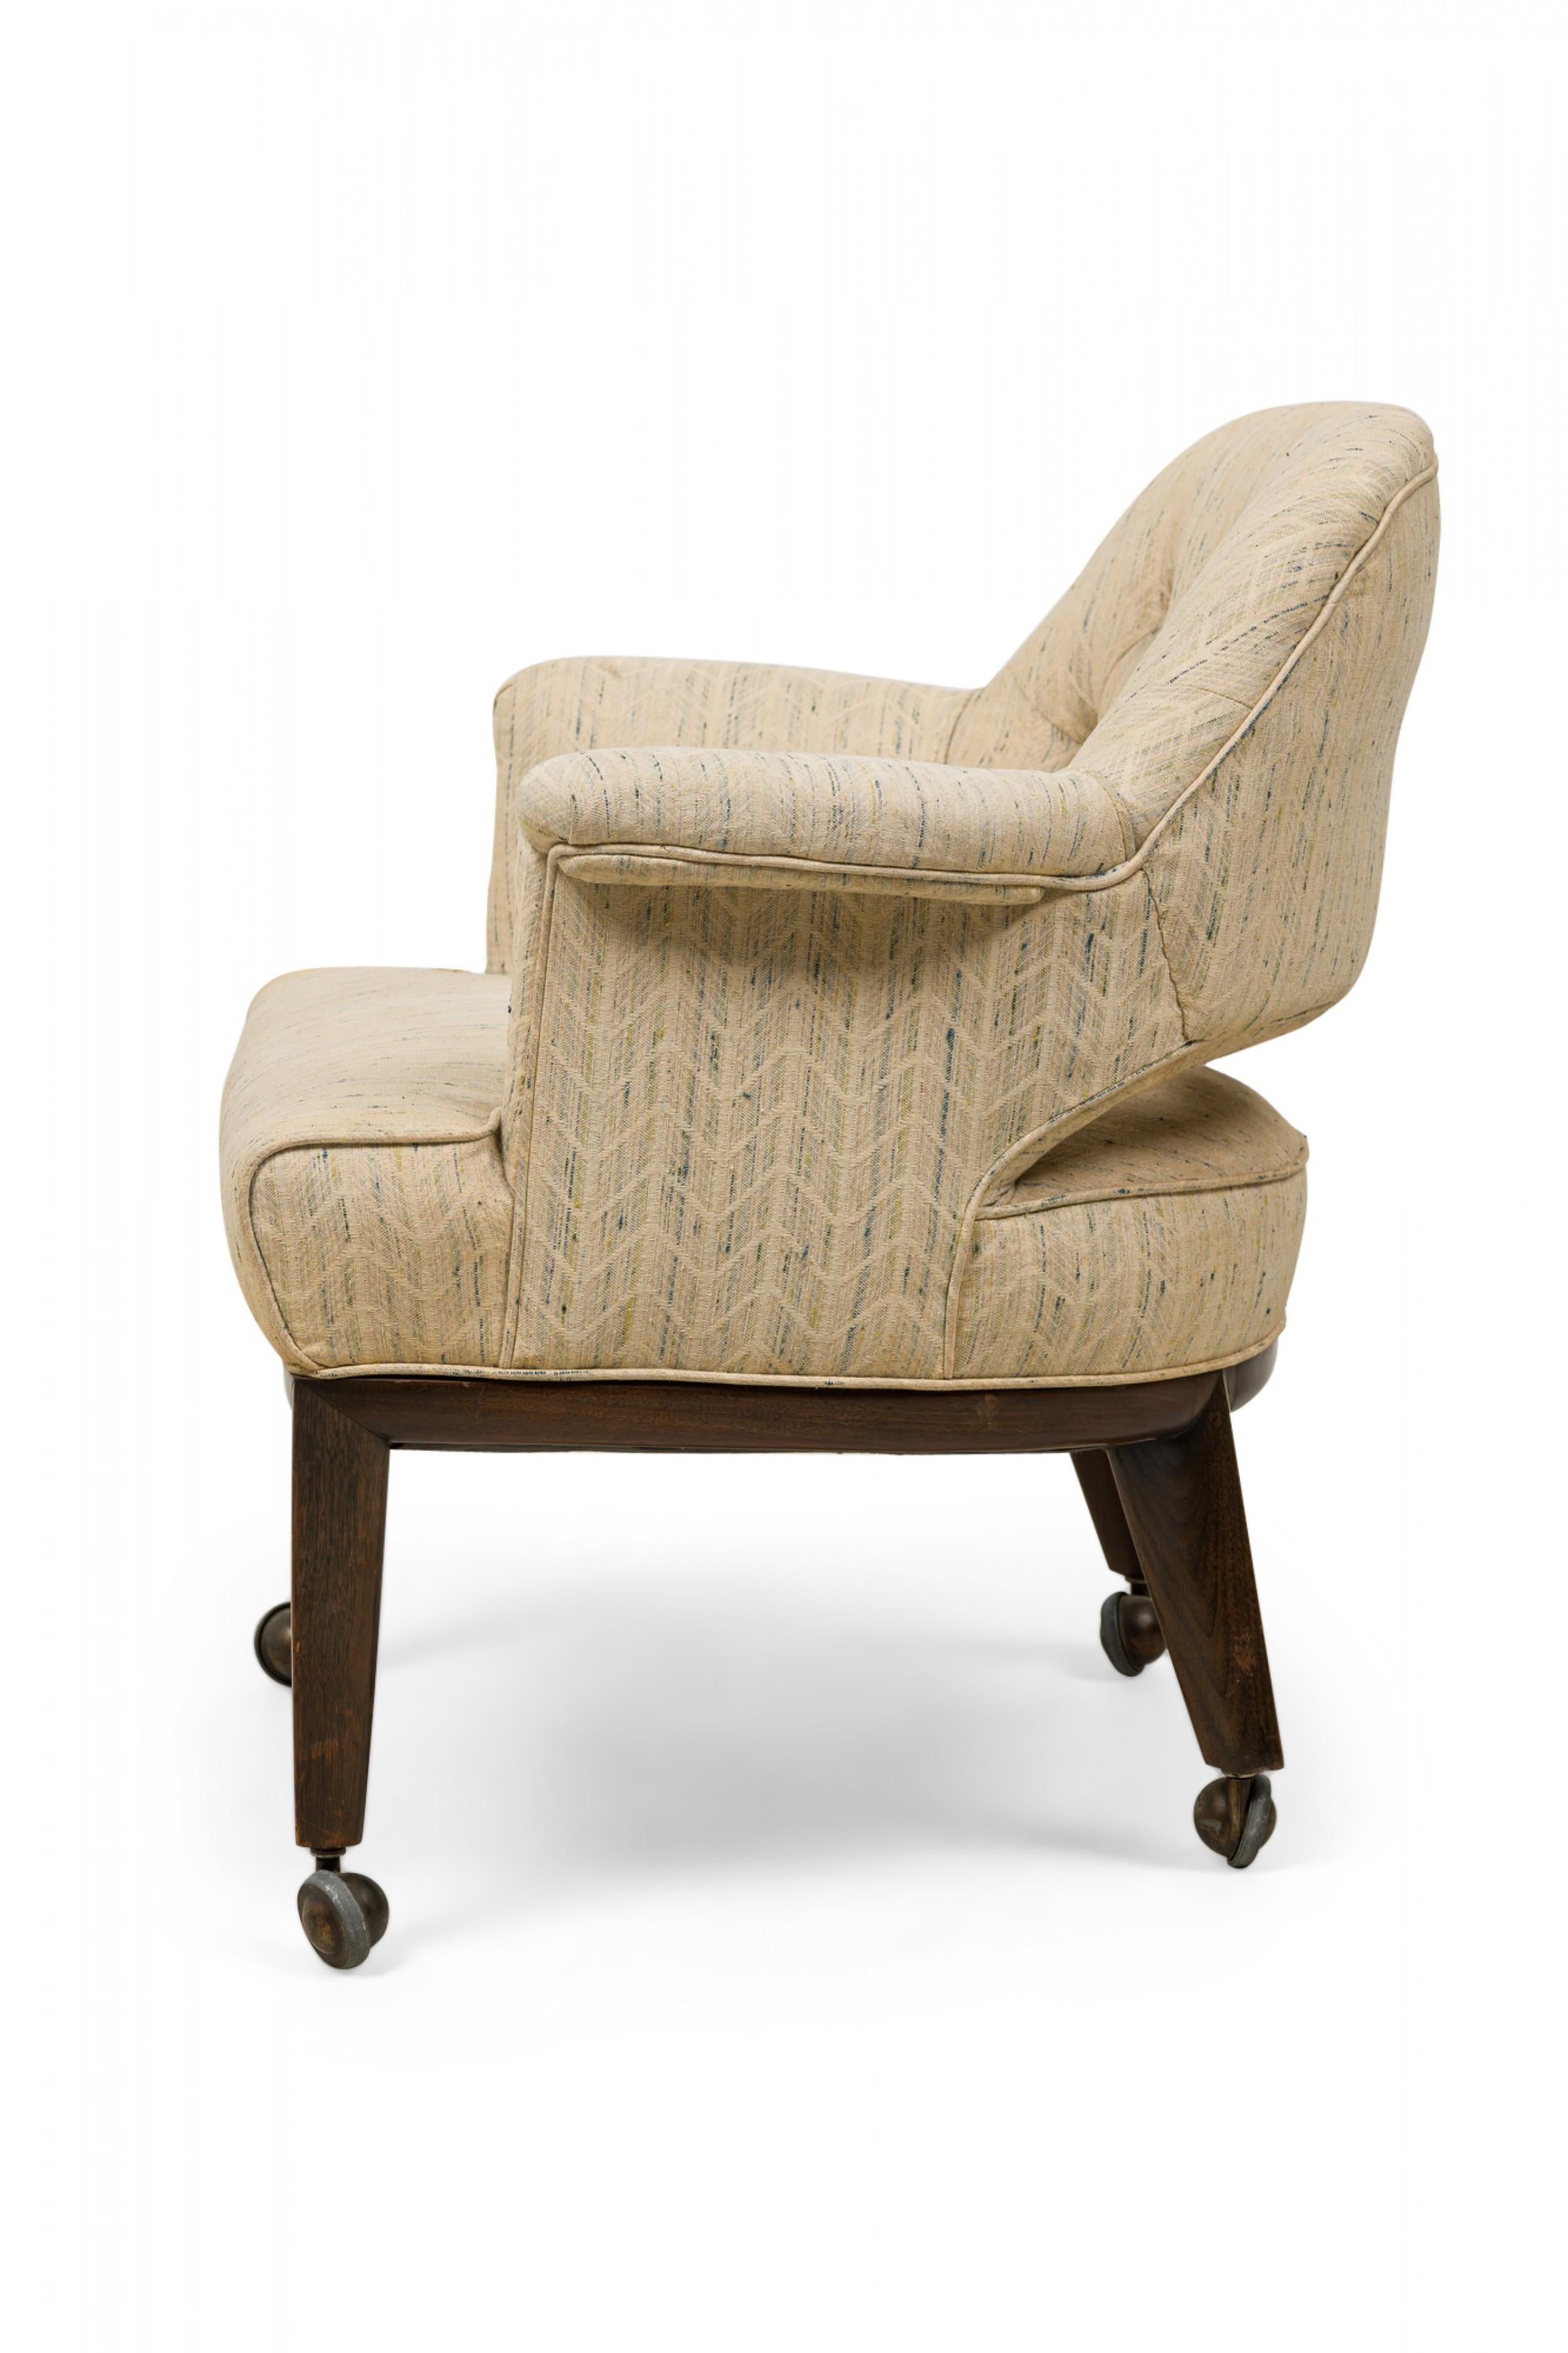 Unknown Set of 4 Dunbar Janus Armchairs in Beige Textured Weave Upholstery, Manner of Ed For Sale